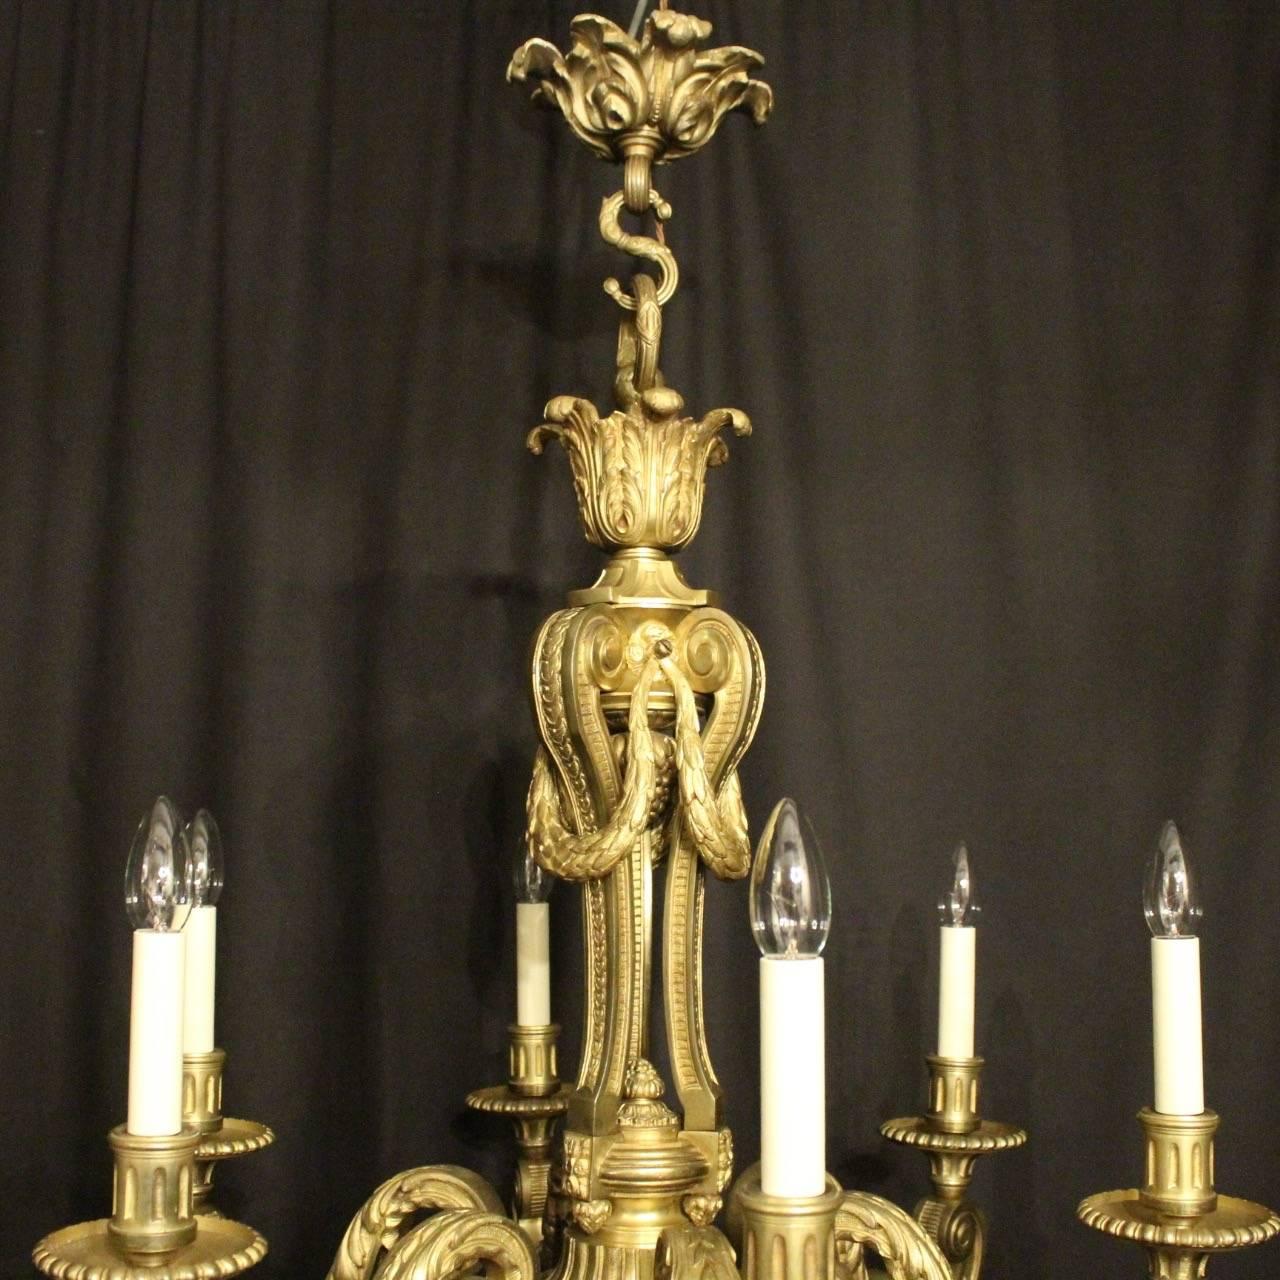 A quality French gilded bronze six-light Mazarin antique chandelier, the decoratively clad acanthus leaf square gauge scrolling arms with circular trumpet reeded bobeches drip pans and reeded candle sconces, issuing from an ornate triple sectional